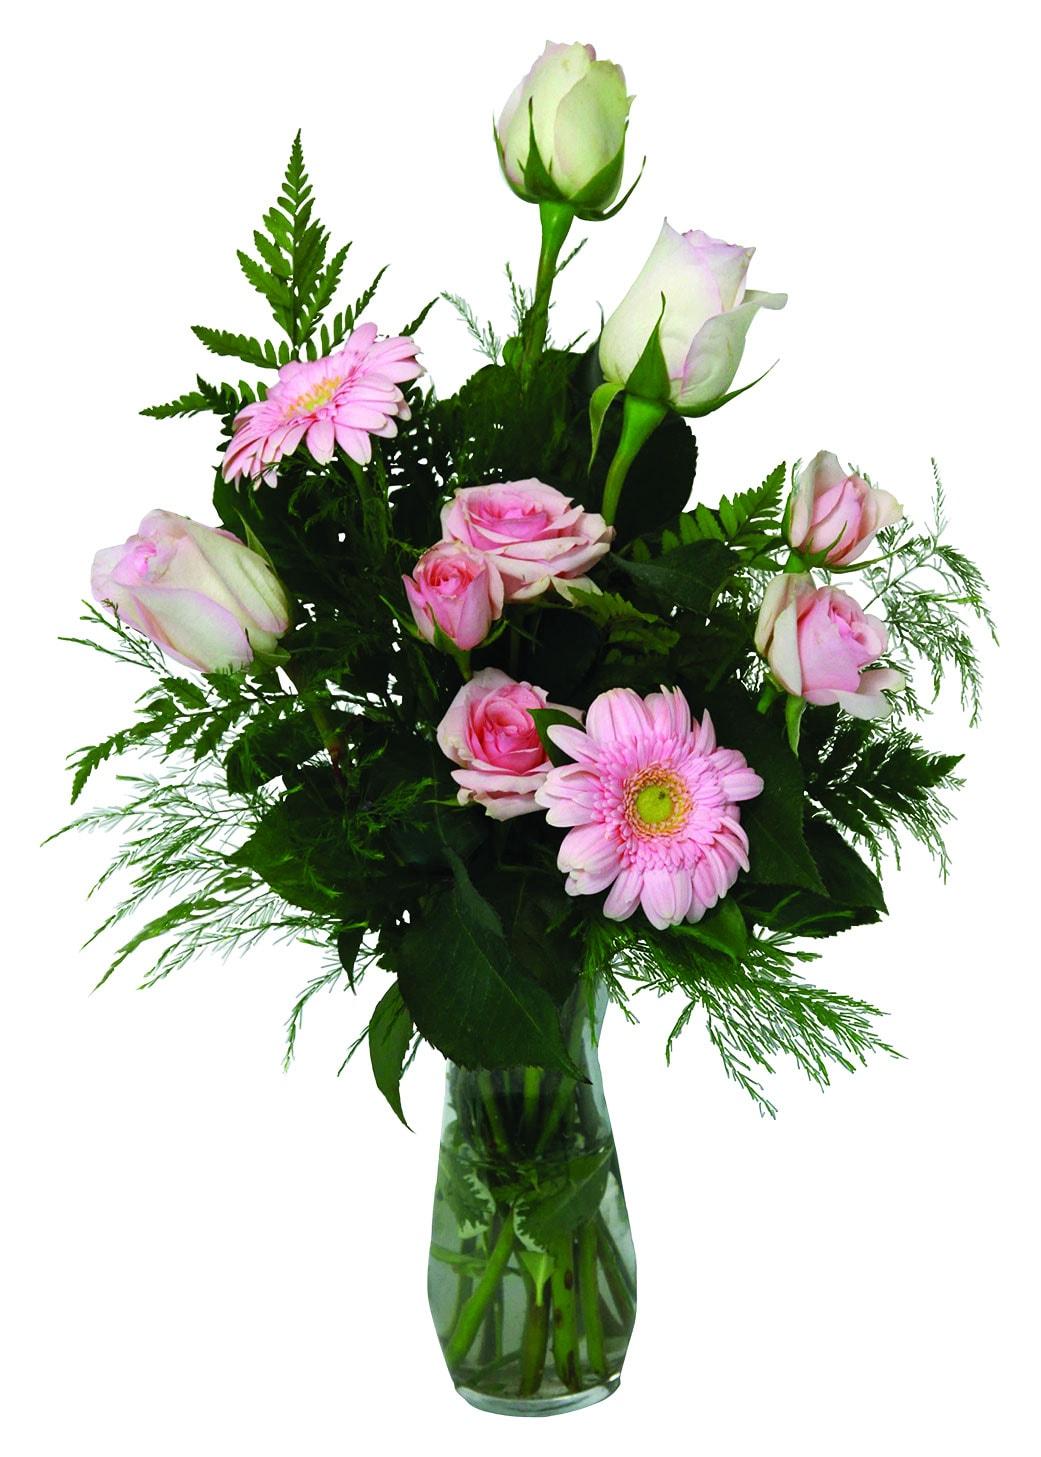 A one sided vase arrangement with pink roses, mini gerberas, greens and fillers.